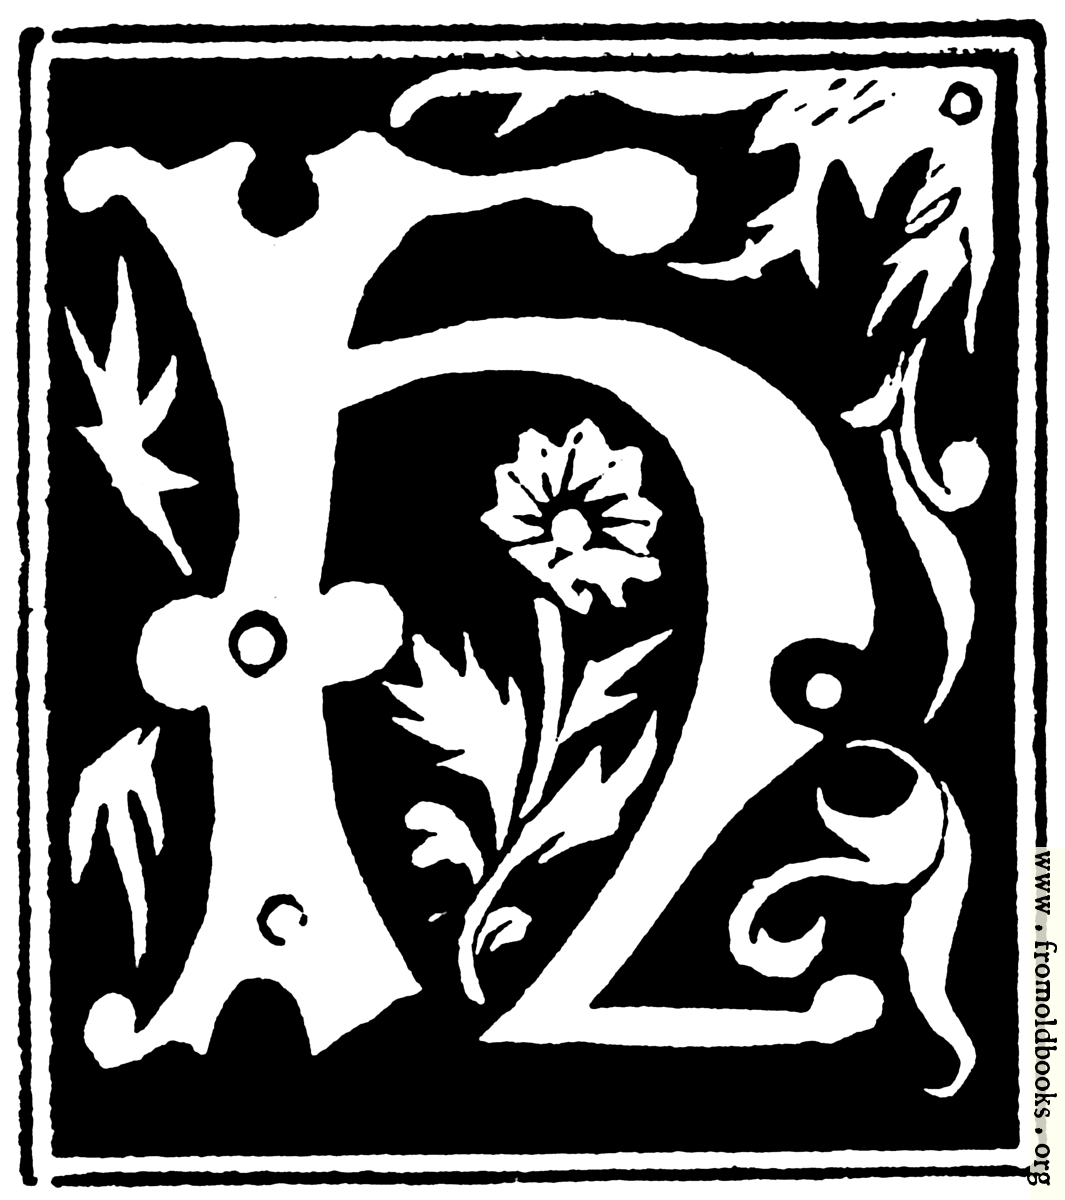 [Picture: Decorative initial letter “H” from 16th Century]